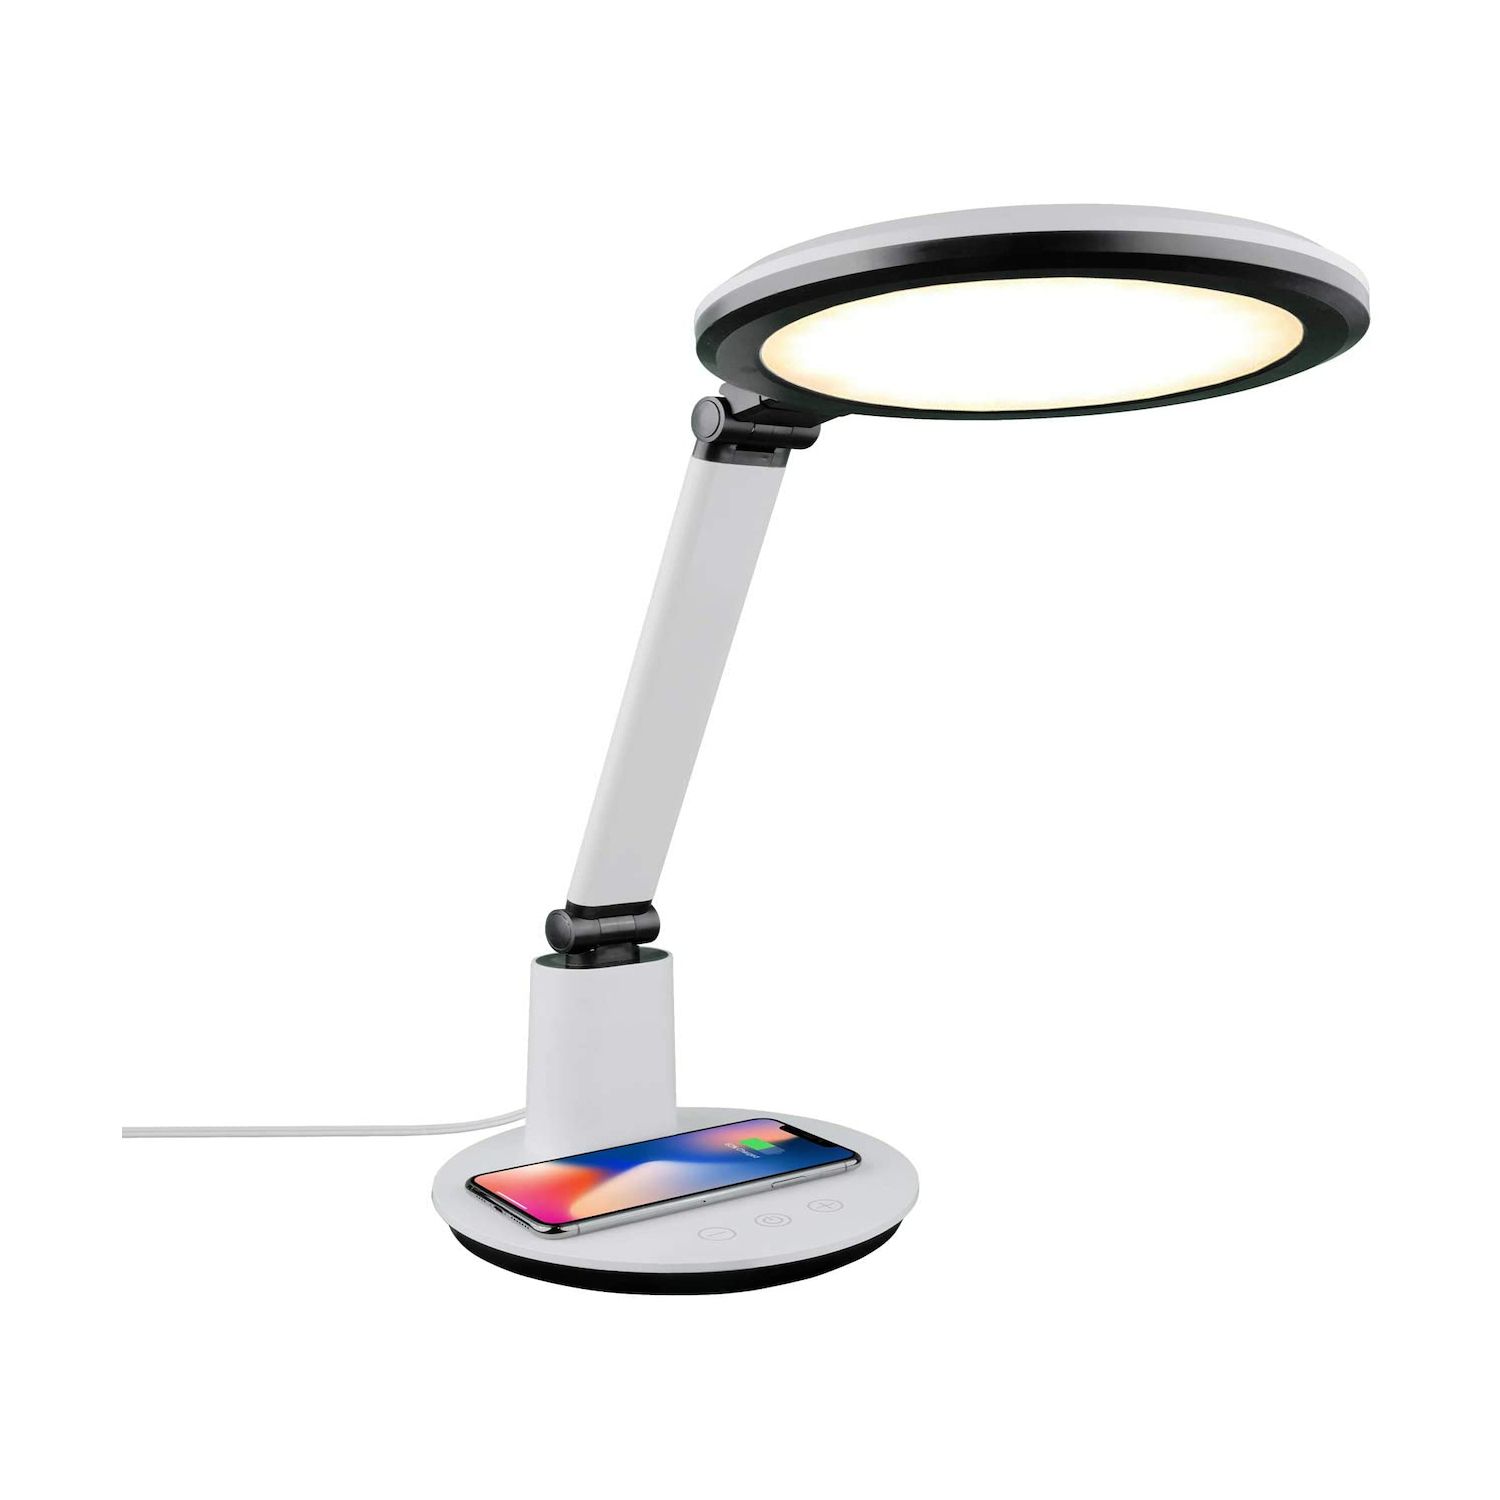 Verilux Magnifier Lamp Accessory :: magnifying glass